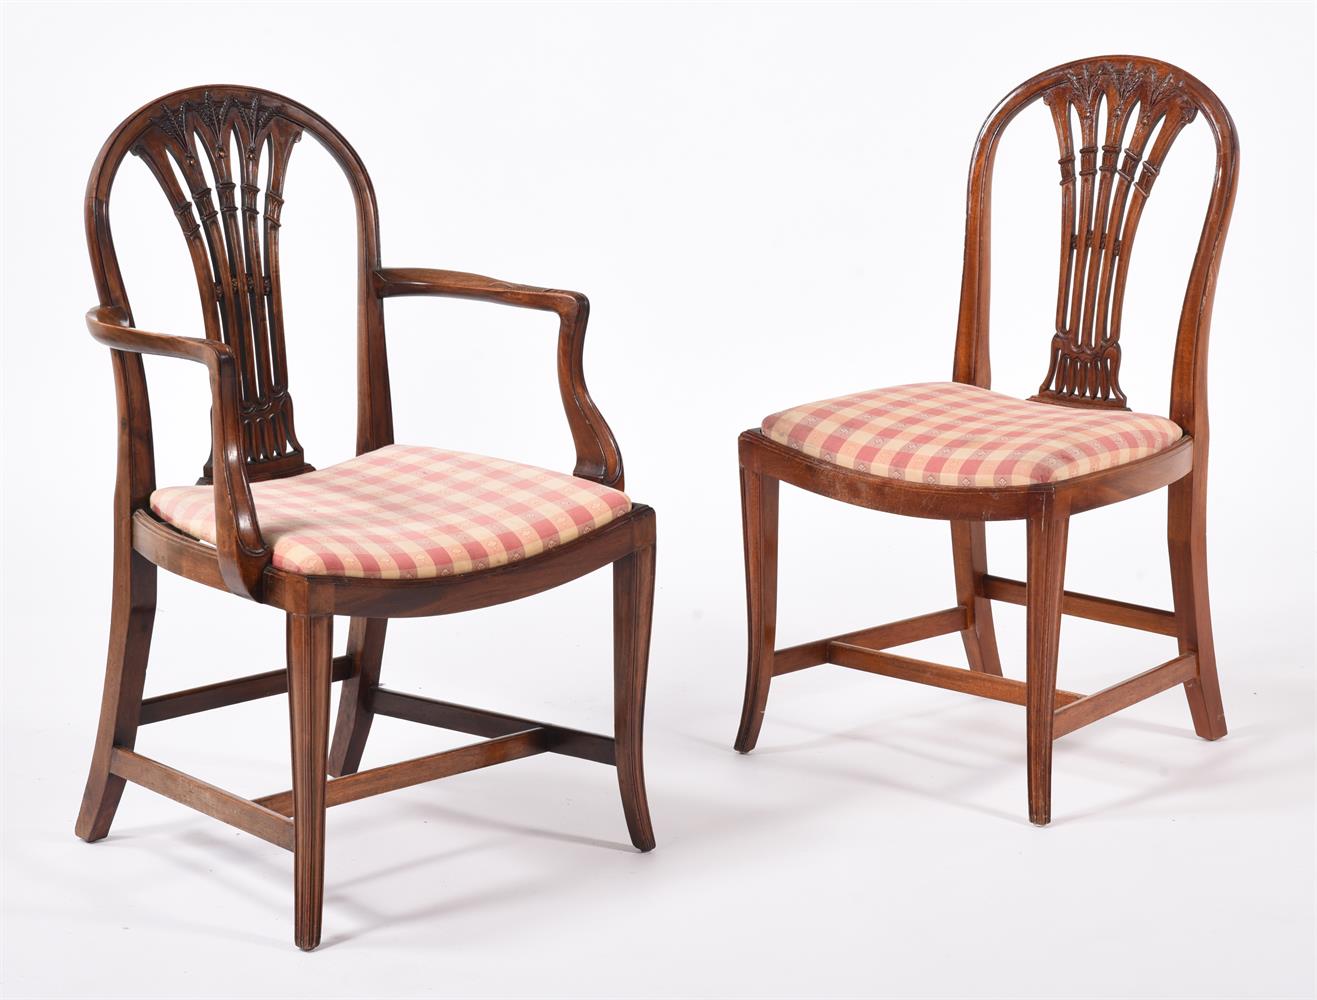 A HARLEQUIN SET OF TEN MAHOGANY DINING CHAIRS IN GEORGE III STYLE - Image 3 of 4